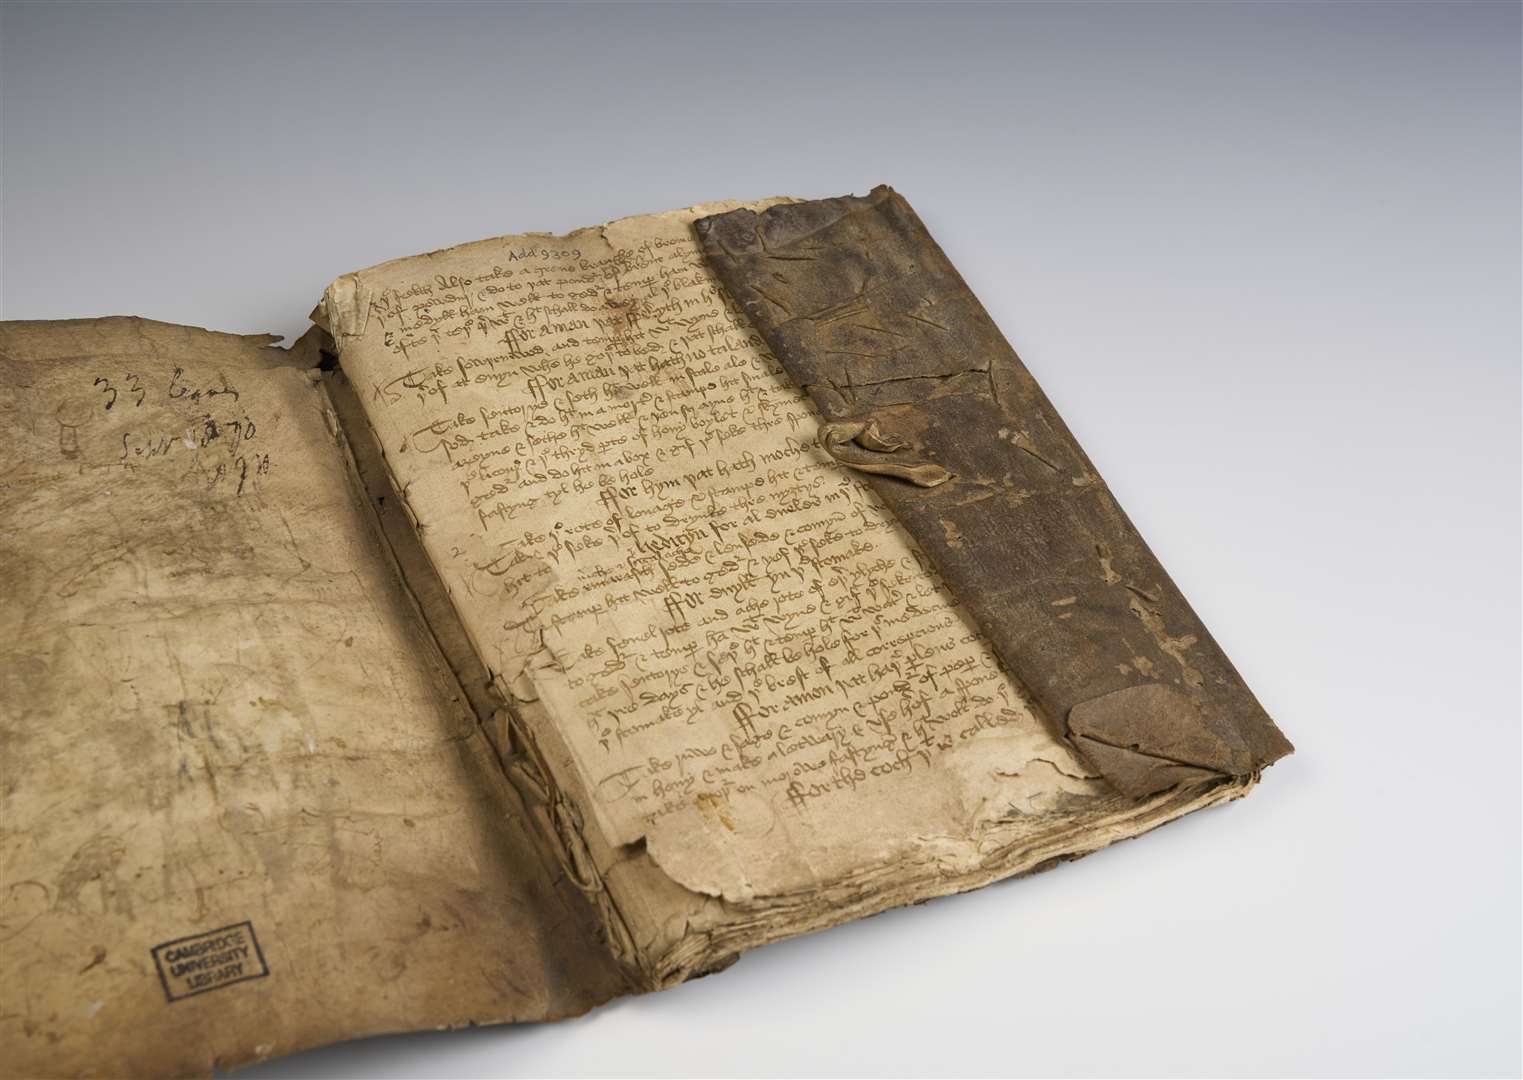 Compilation of medical recipes in original 15th-century leather wrapper (The Master and Fellows of Trinity College, Cambridge/PA)